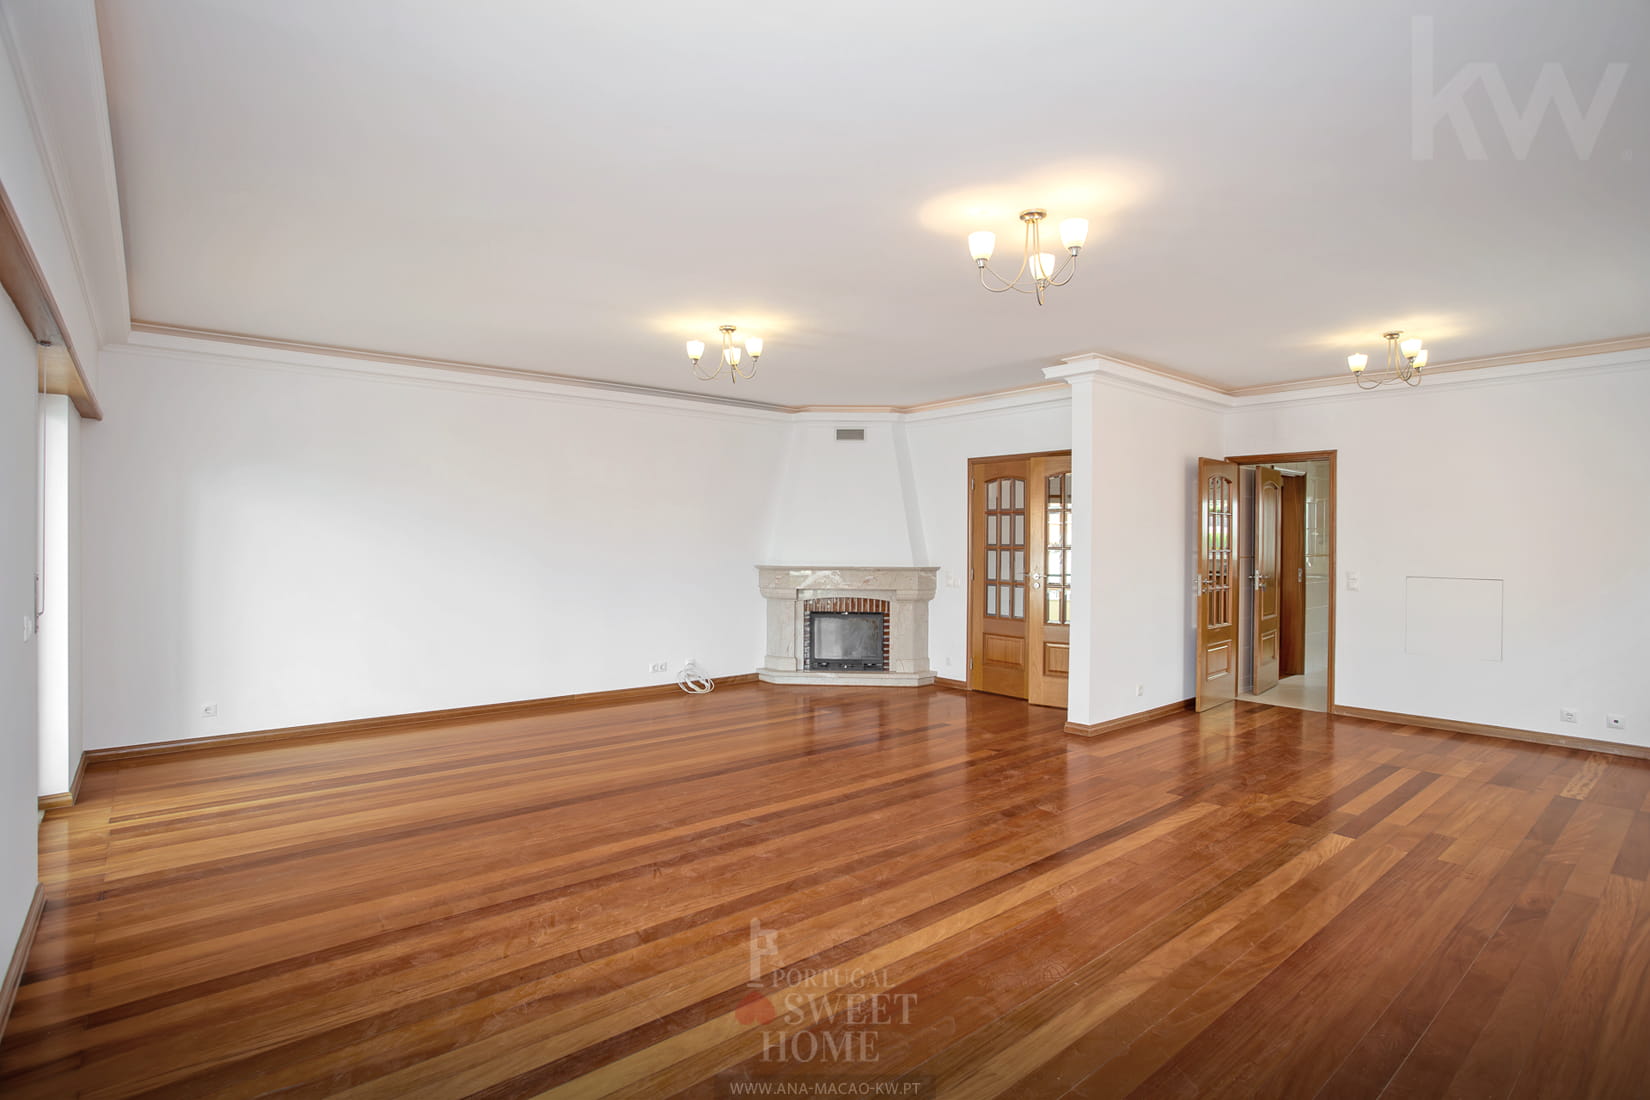 Large, very bright living room with fireplace